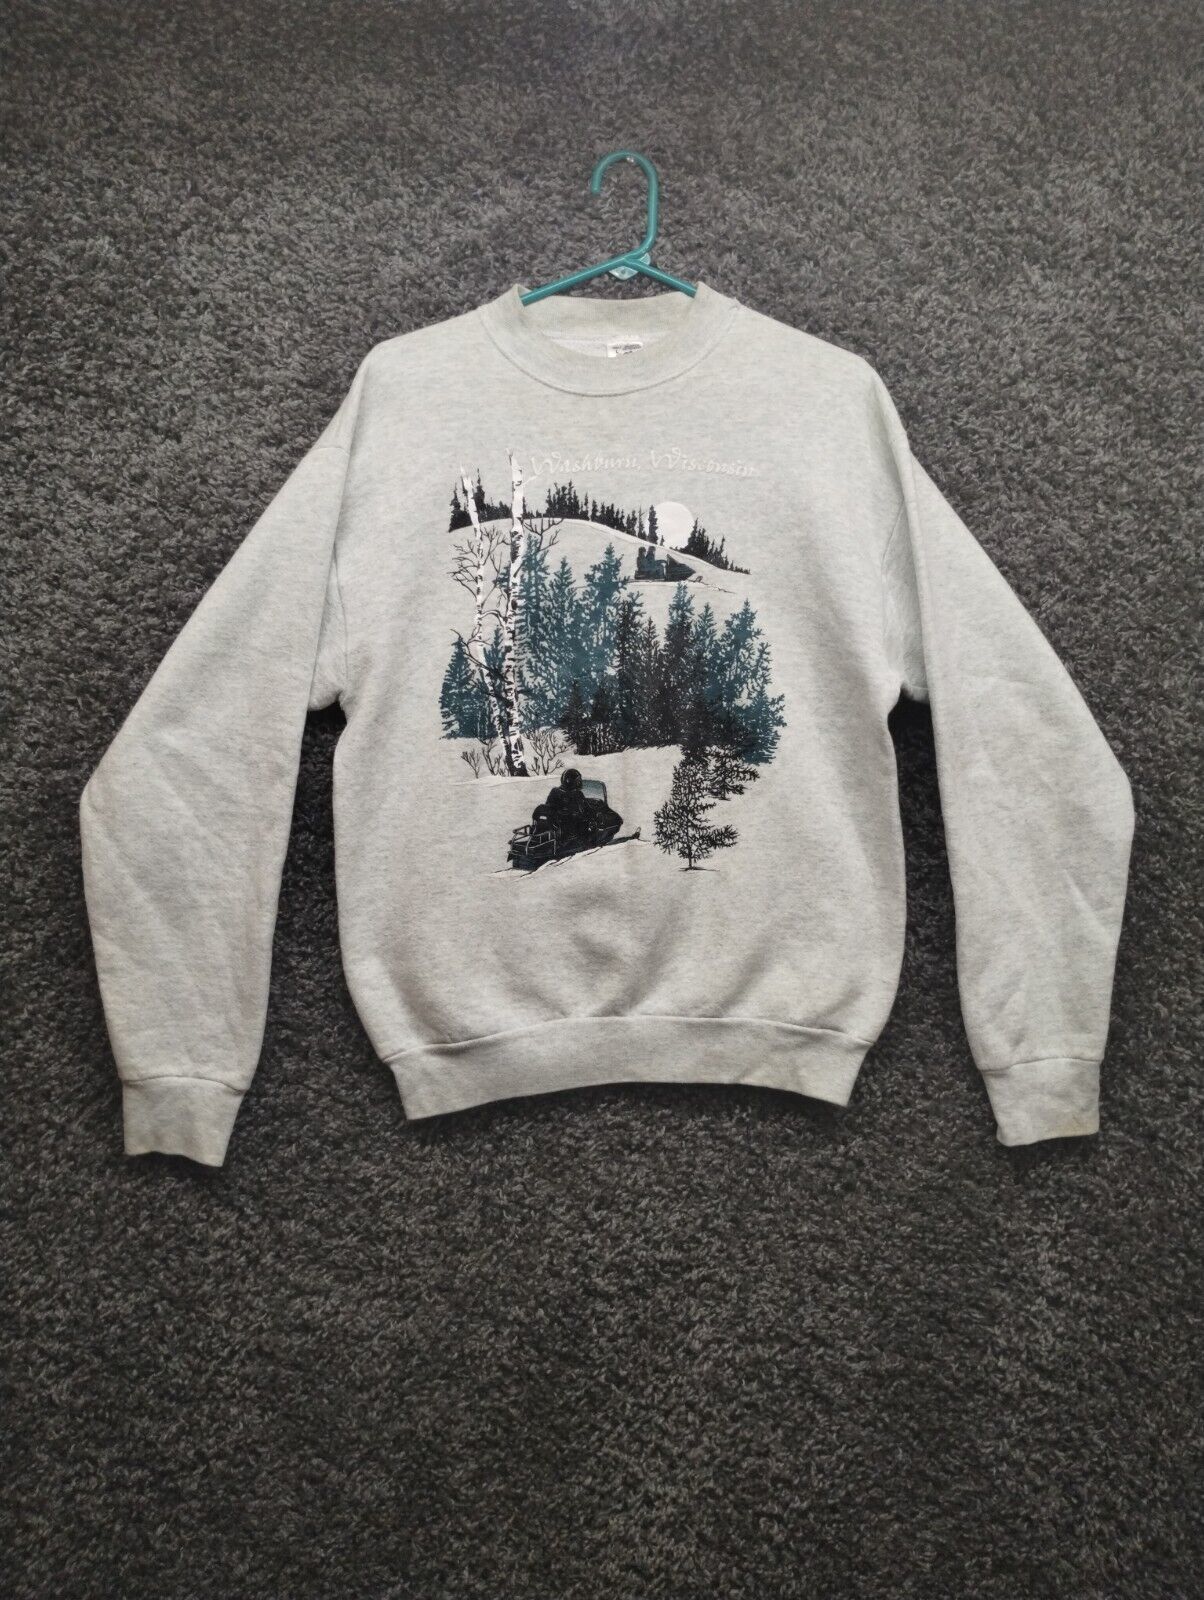 Primary image for Vintage Fruit Of the Loom Sweater Adult Large Gray Washburn Wisconsin Snowmobile